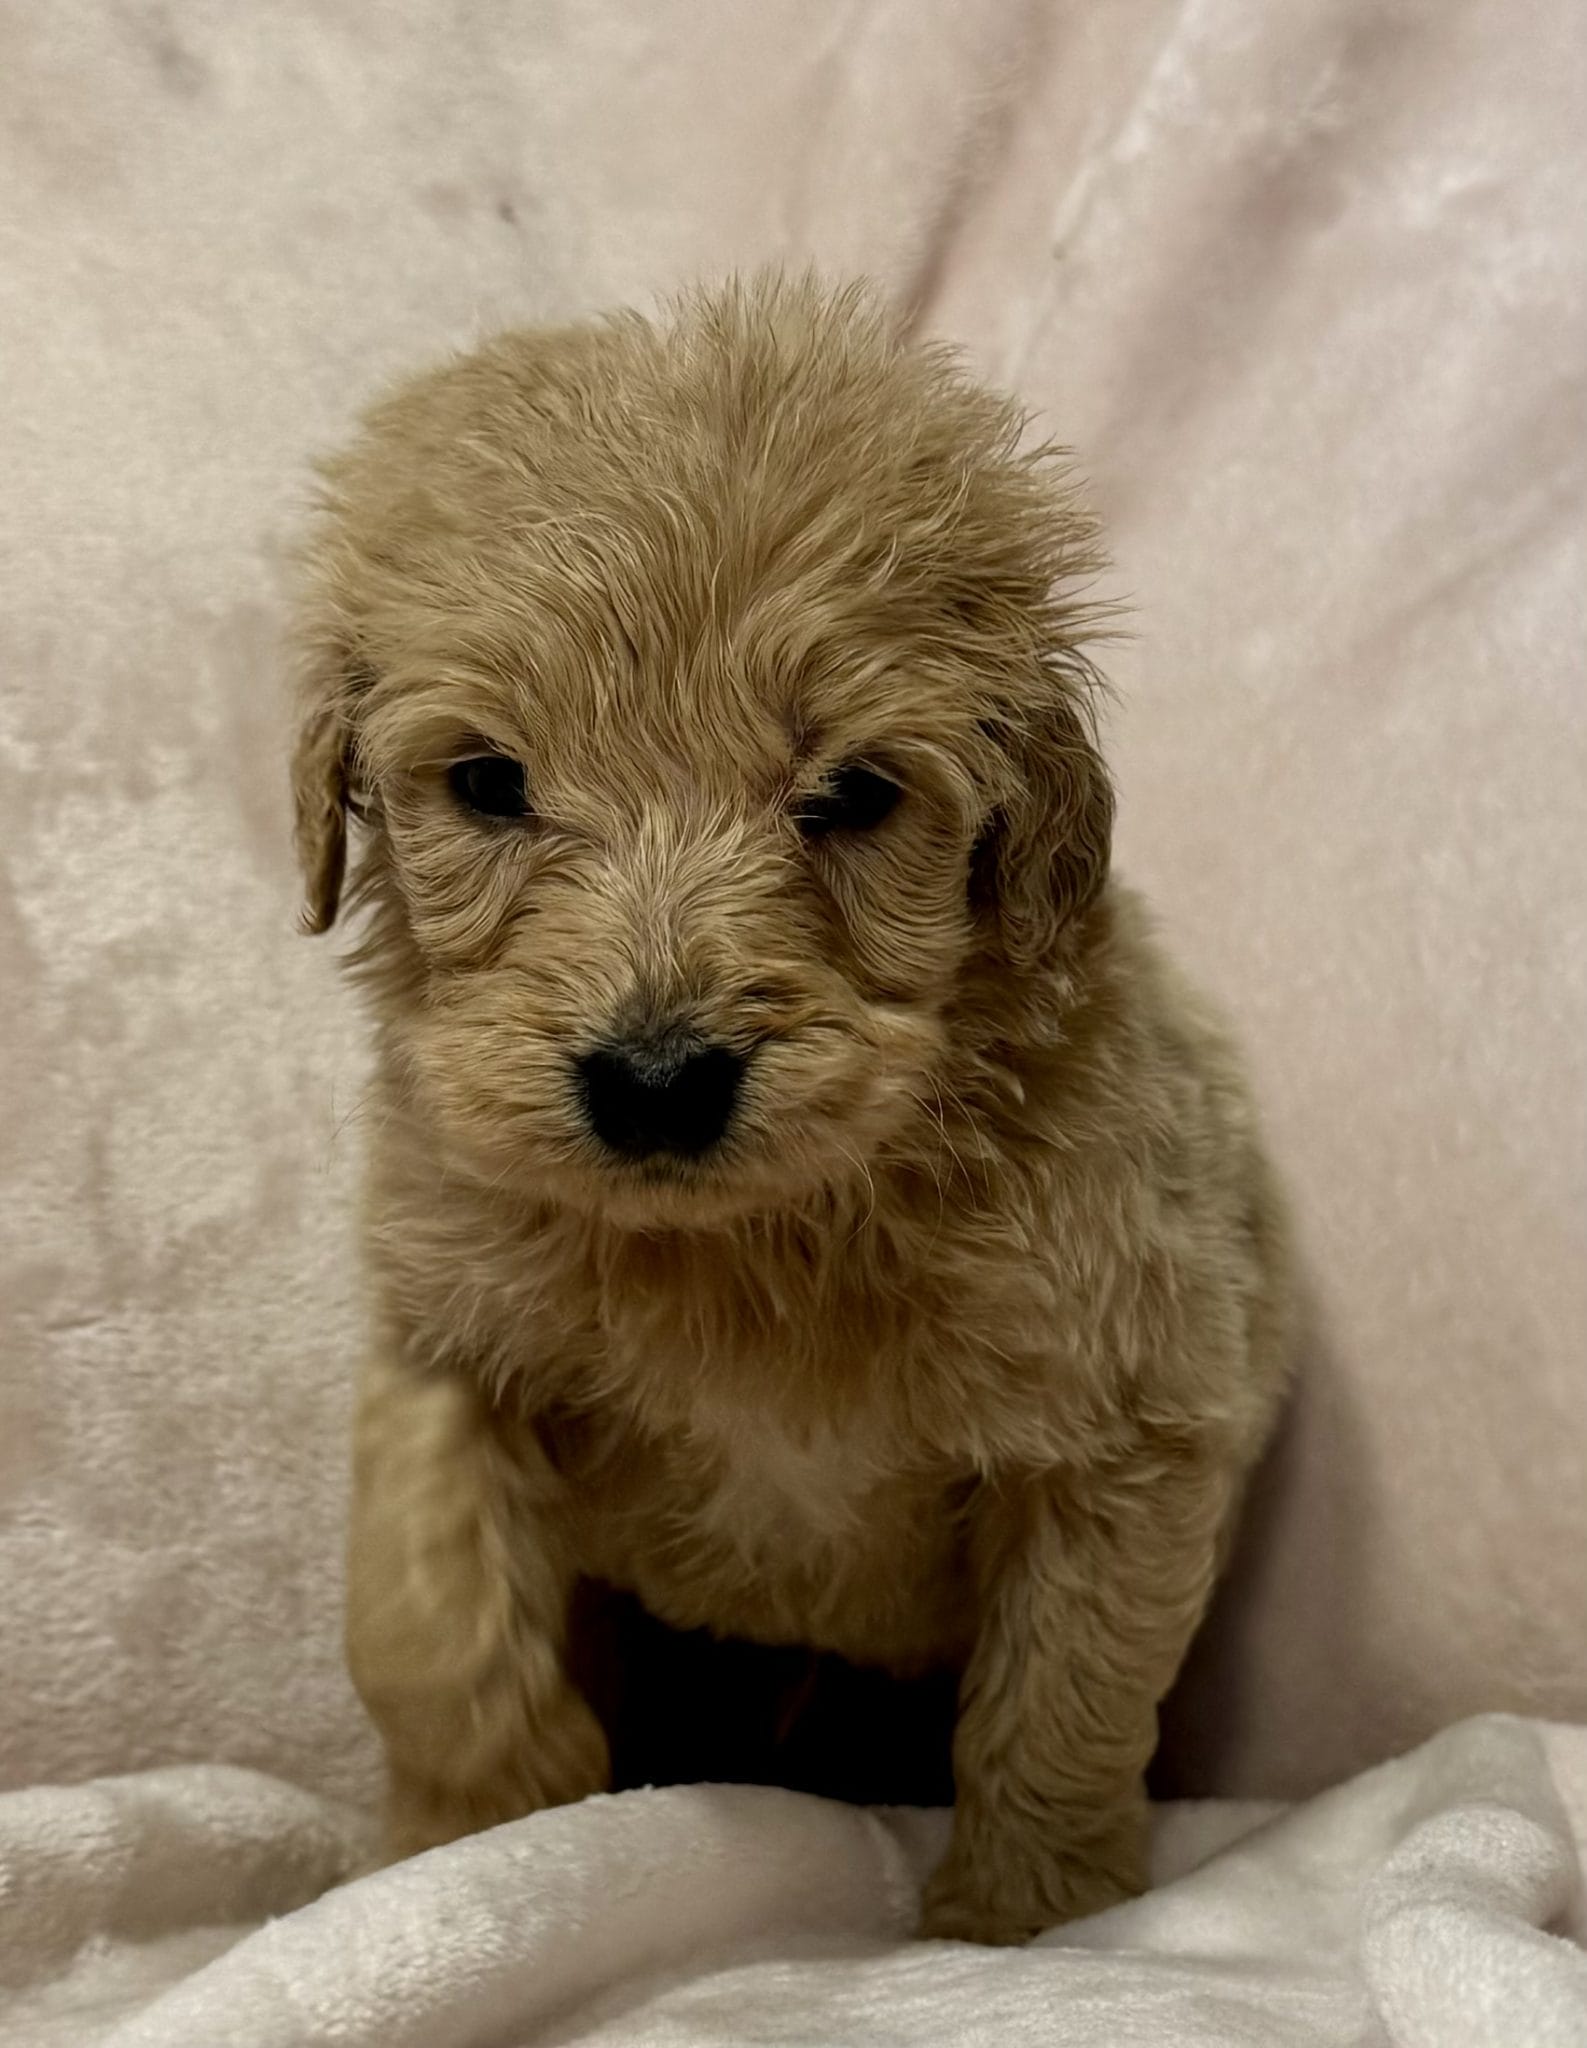 F1 Standard Goldendoodle Male Puppy “Barkley” 55-65 lbs